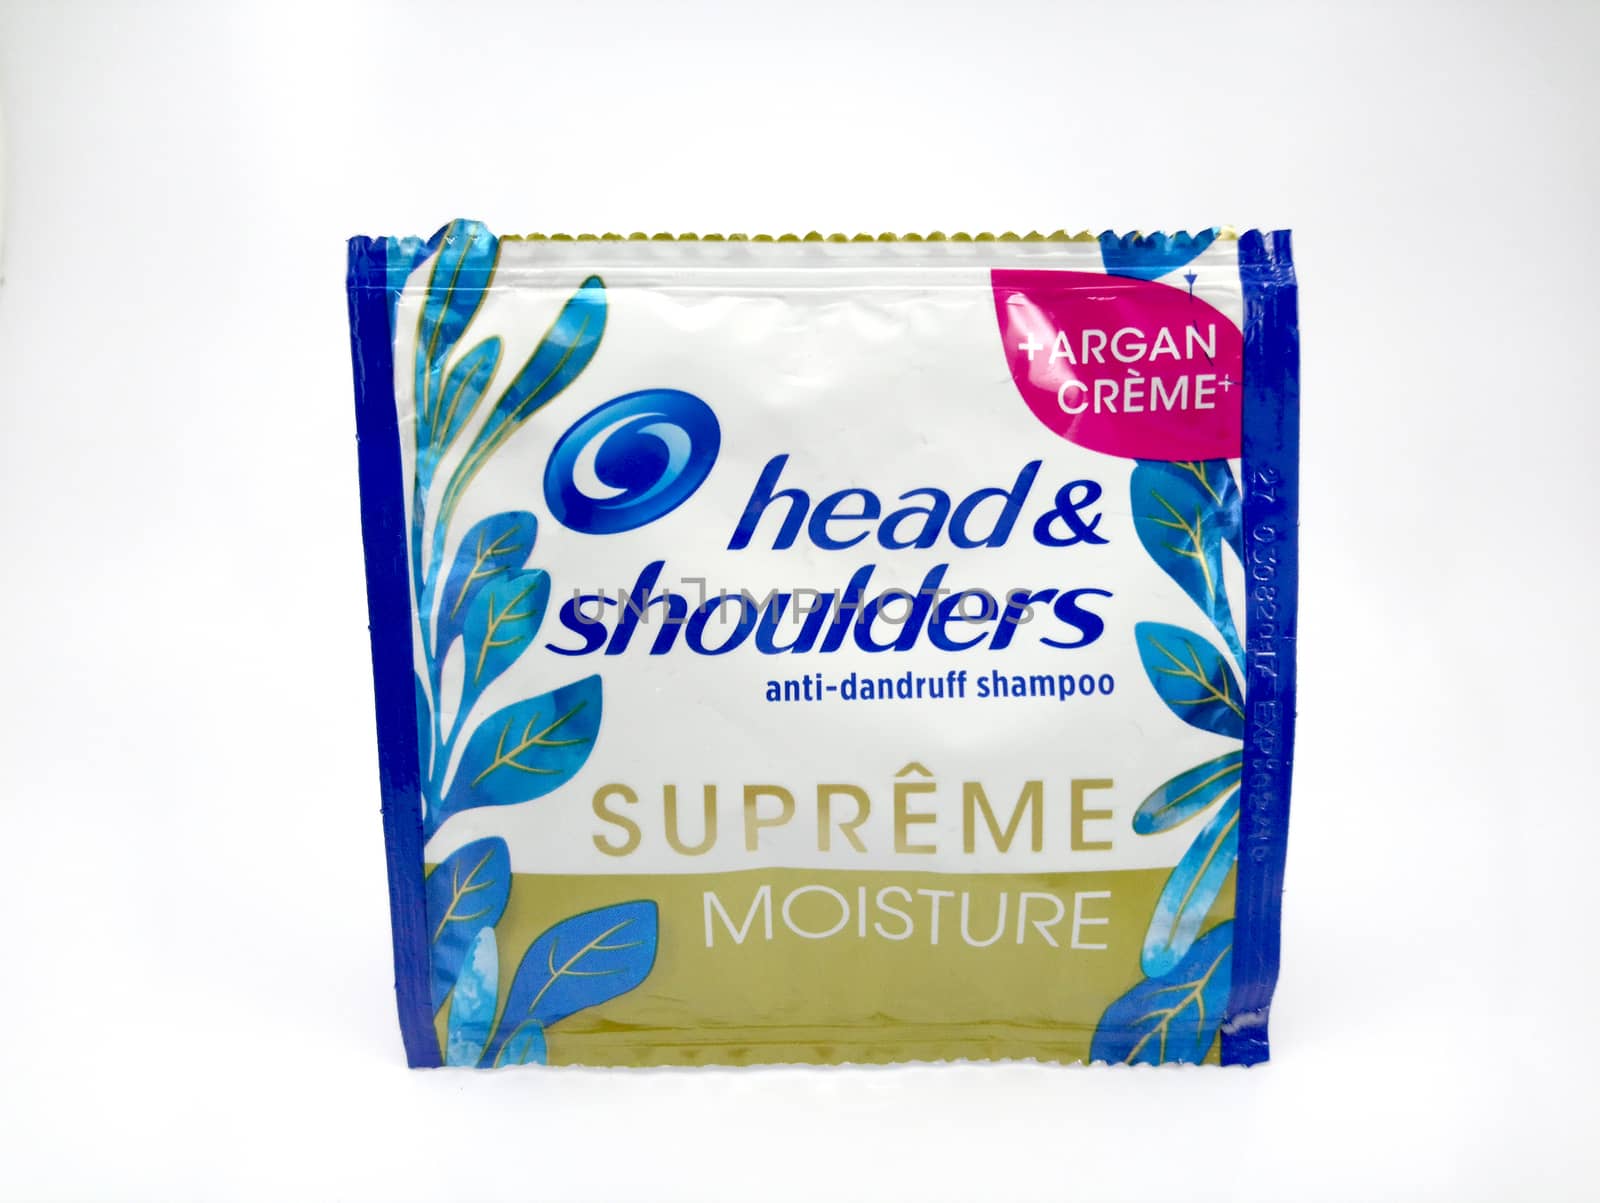 Head and shoulders shampoo sachet in Manila, Philippines by imwaltersy